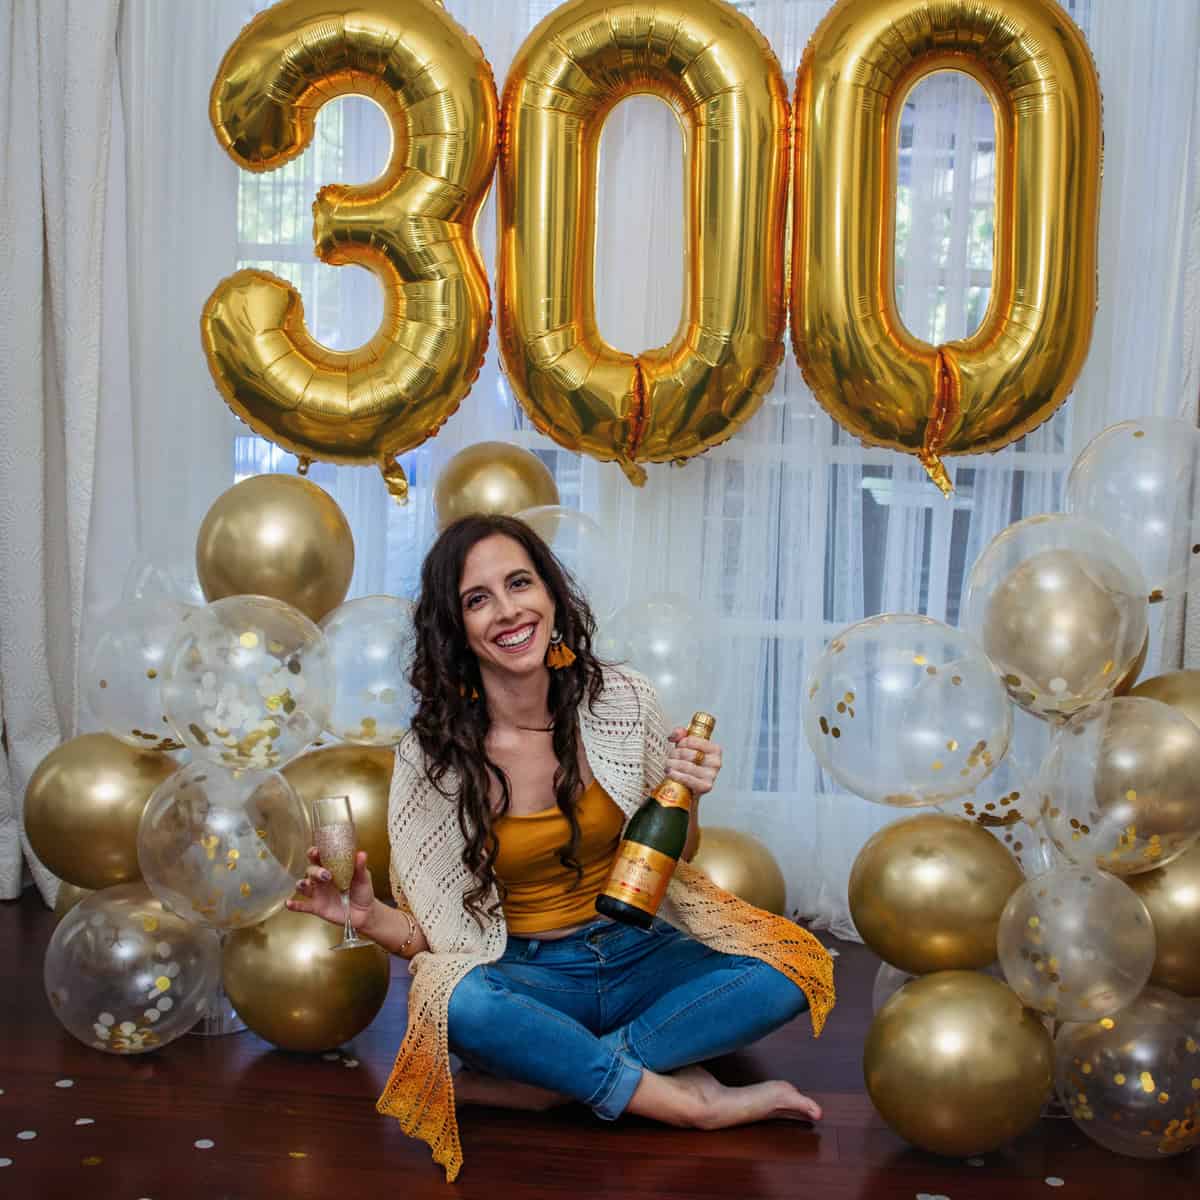 A woman sitting on the floor smiles, holding a champagne bottle, surrounded by gold and white balloons and "300" gold balloons in the background, dressed in a Ray of Sunshine Knit Shawl.